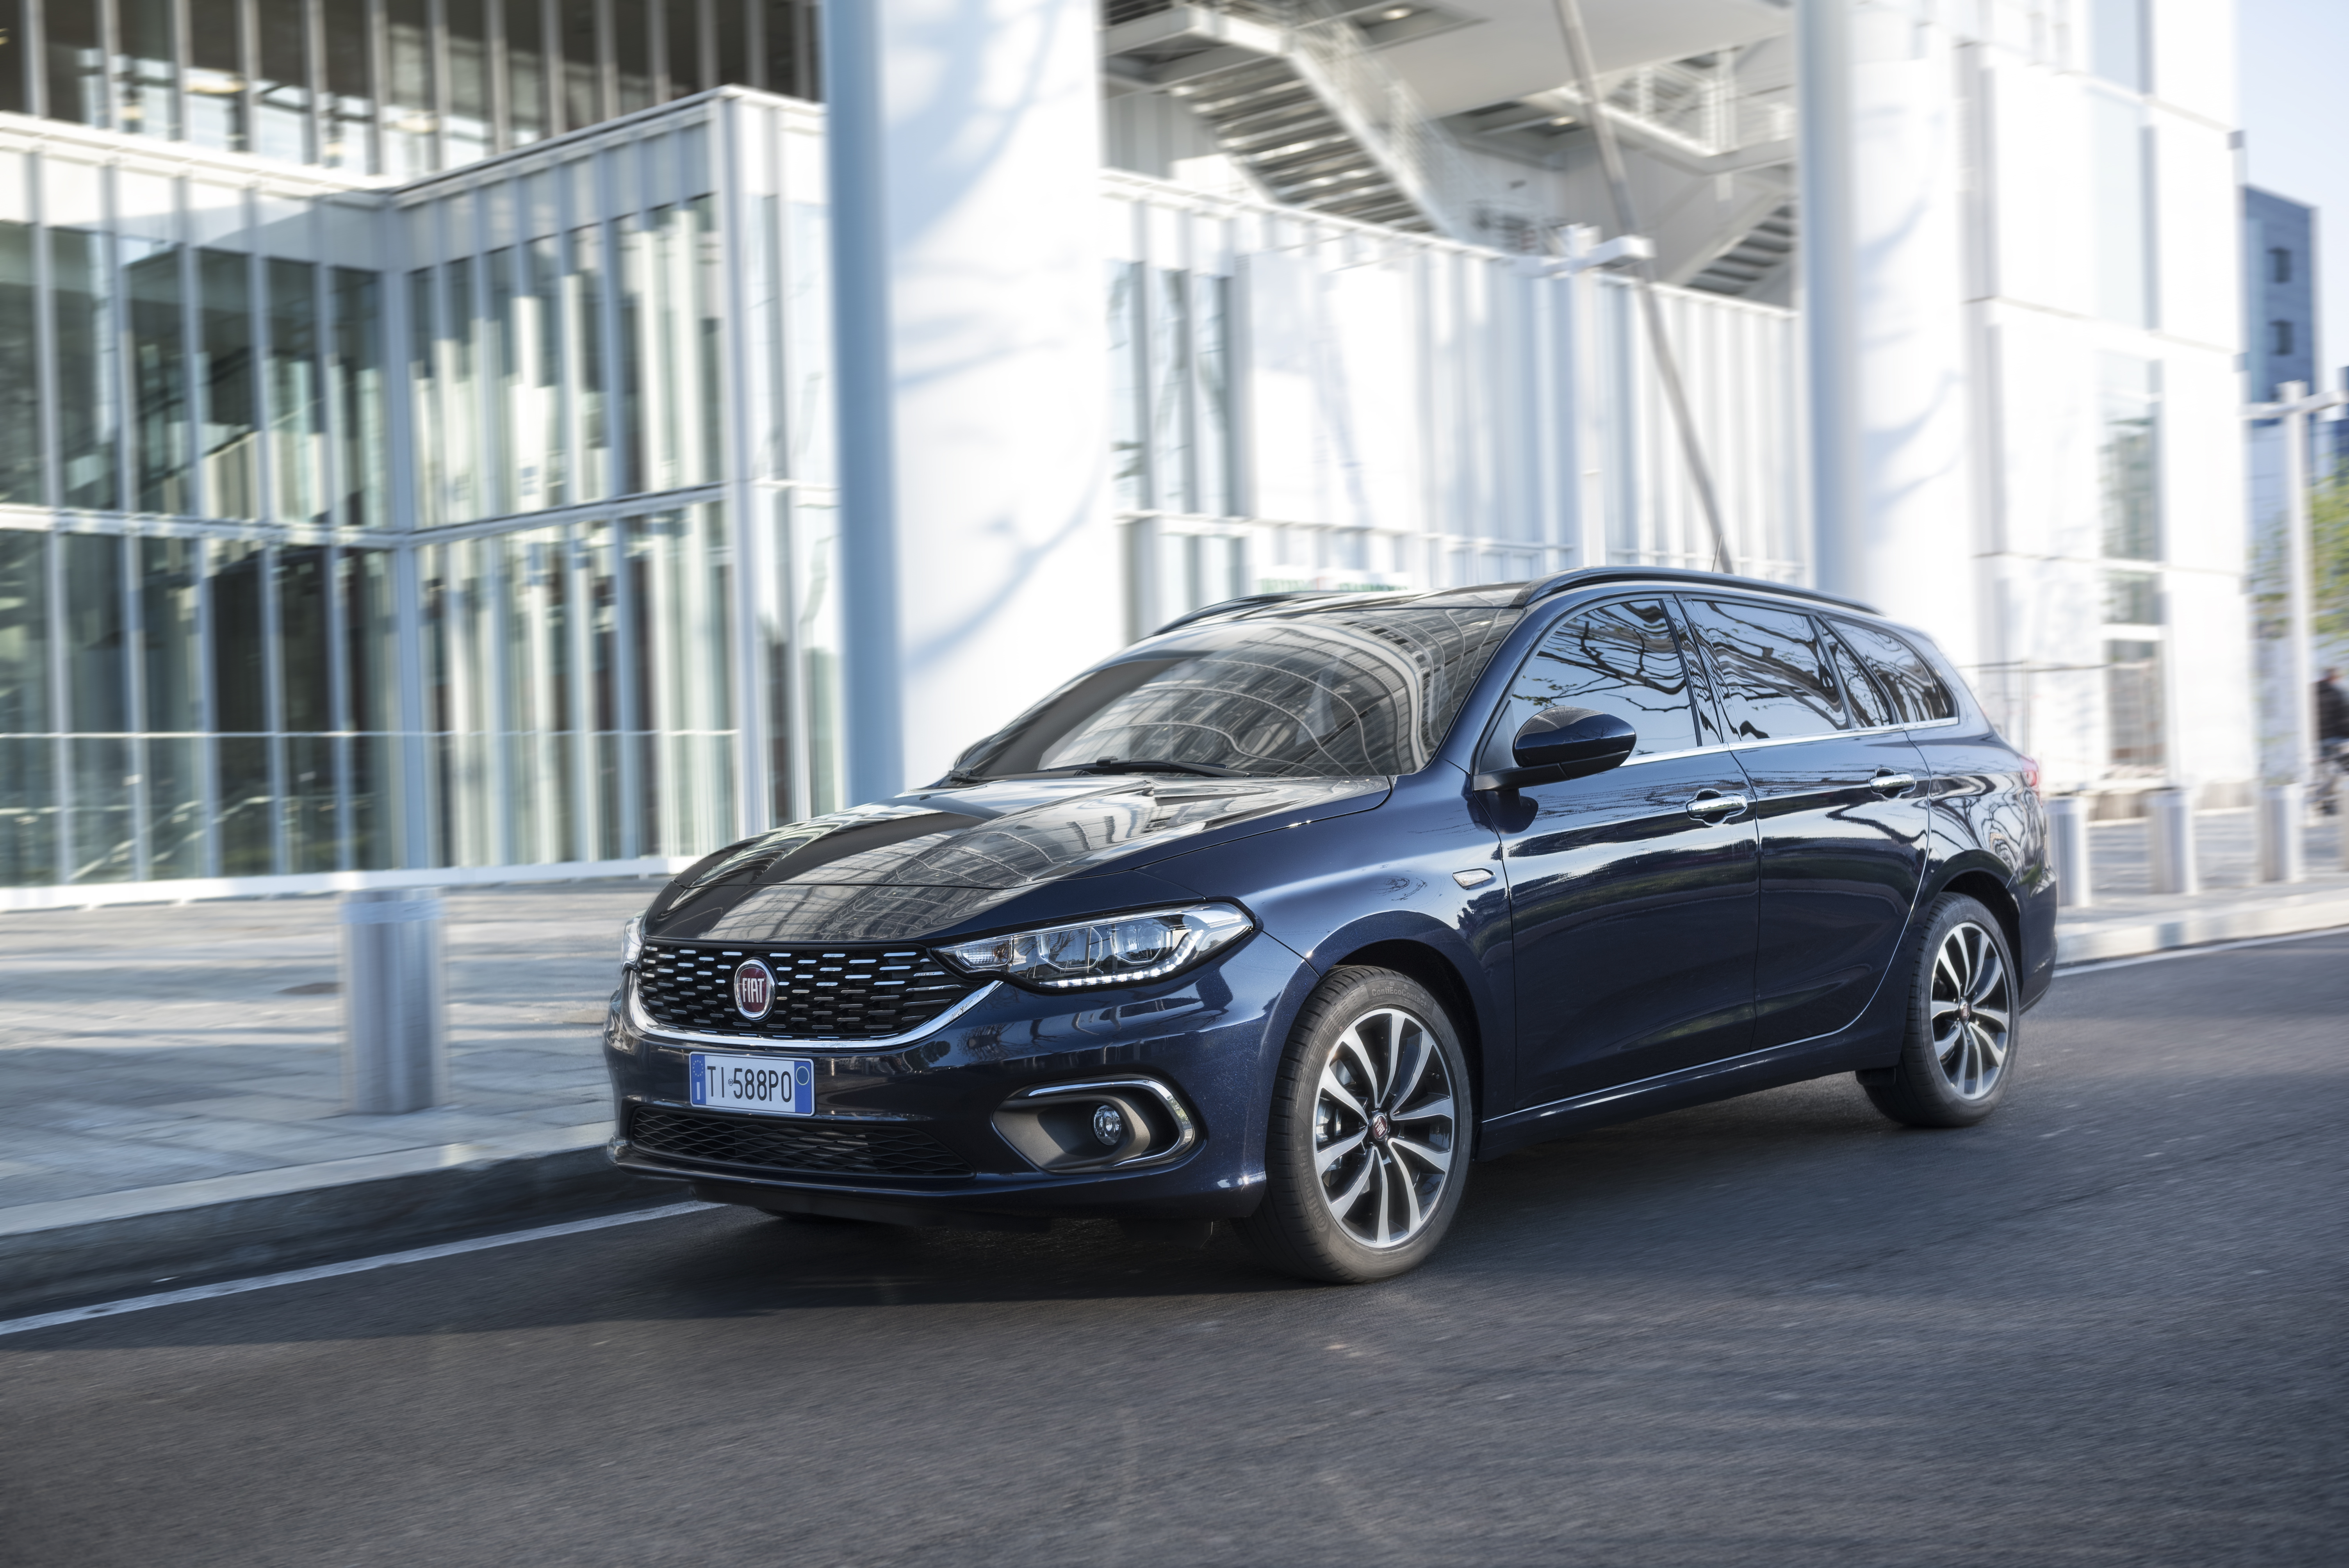 Fiat Tipo Station Wagon reviews model